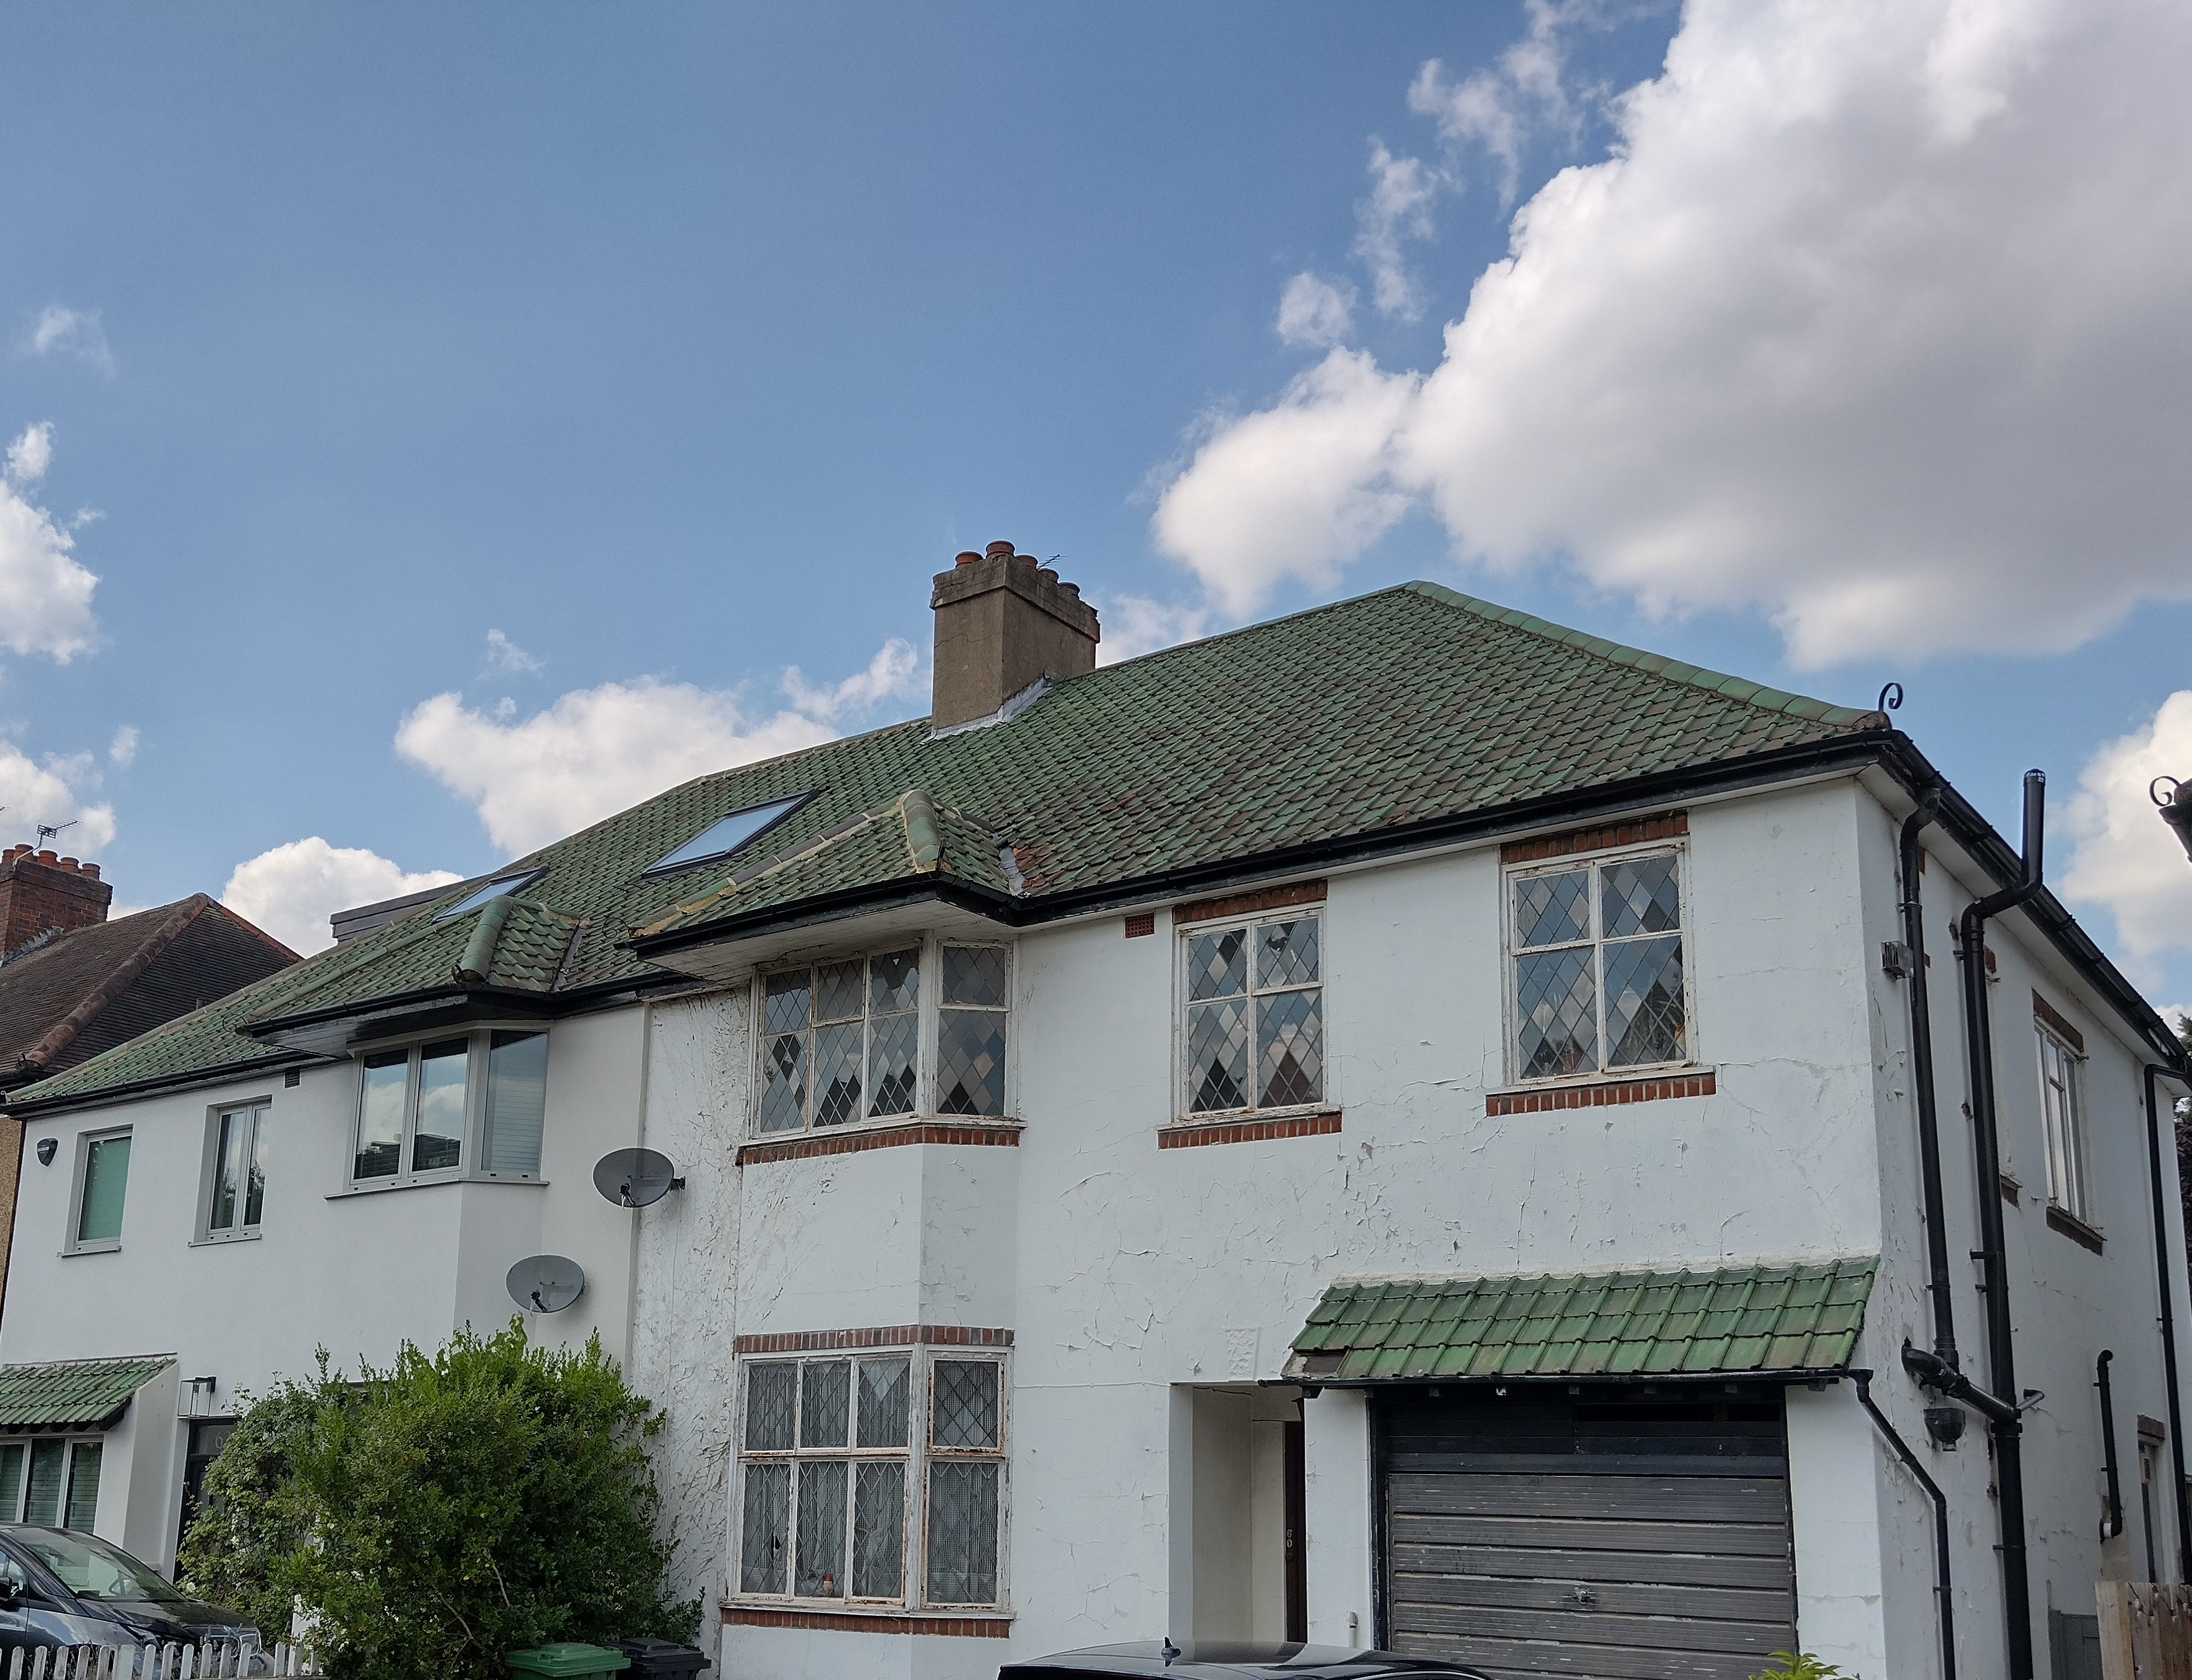 Fig. 53: Green roof tiles are characteristic of Goodwood Road. This house also has attractive original casement windows